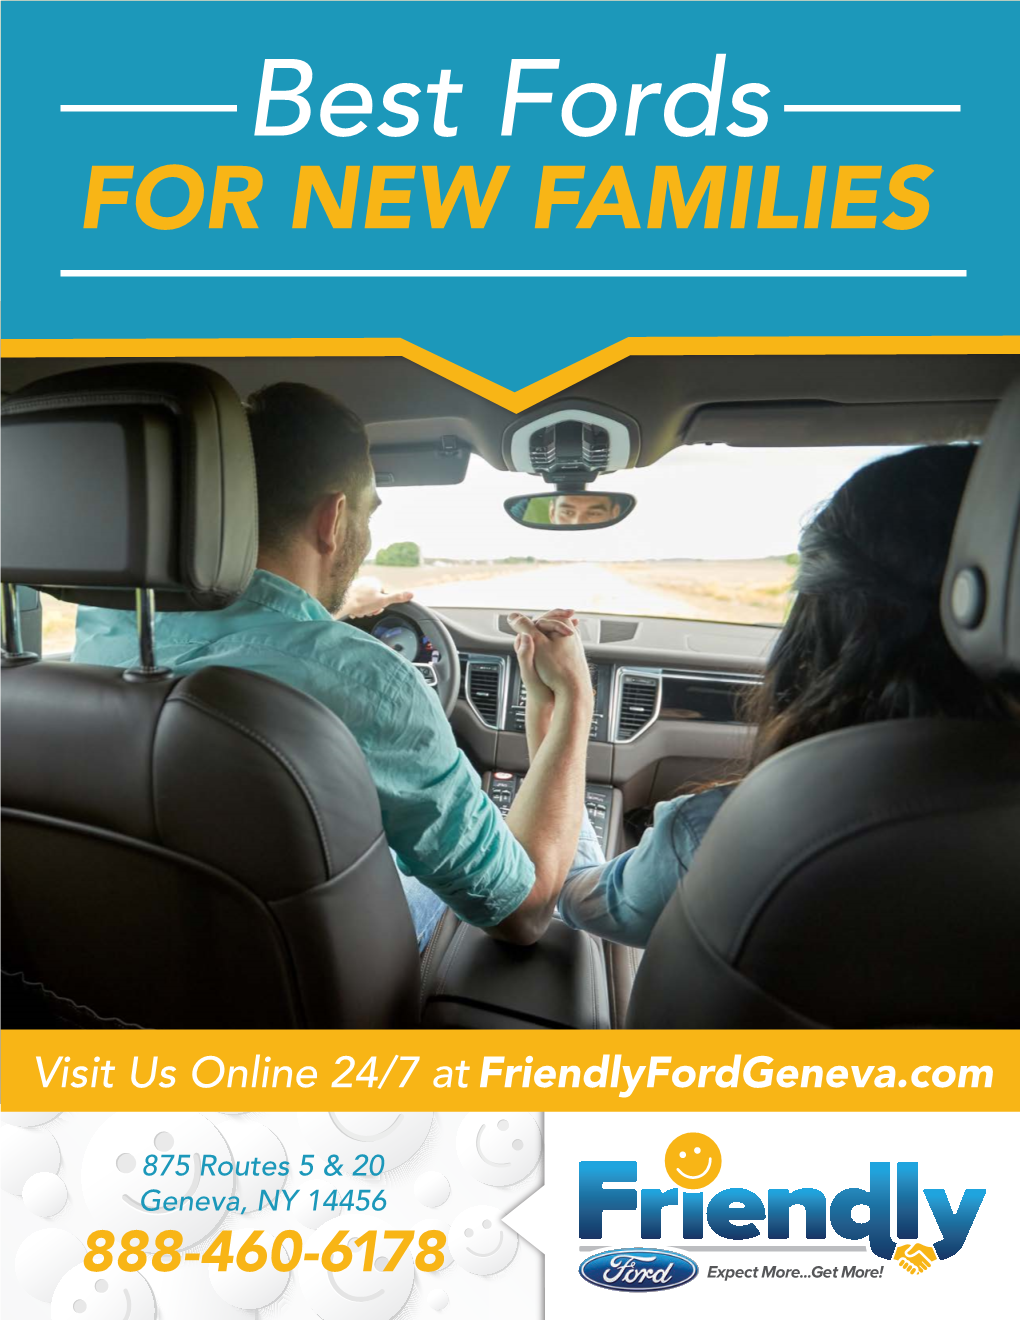 Best Fords for NEW FAMILIES